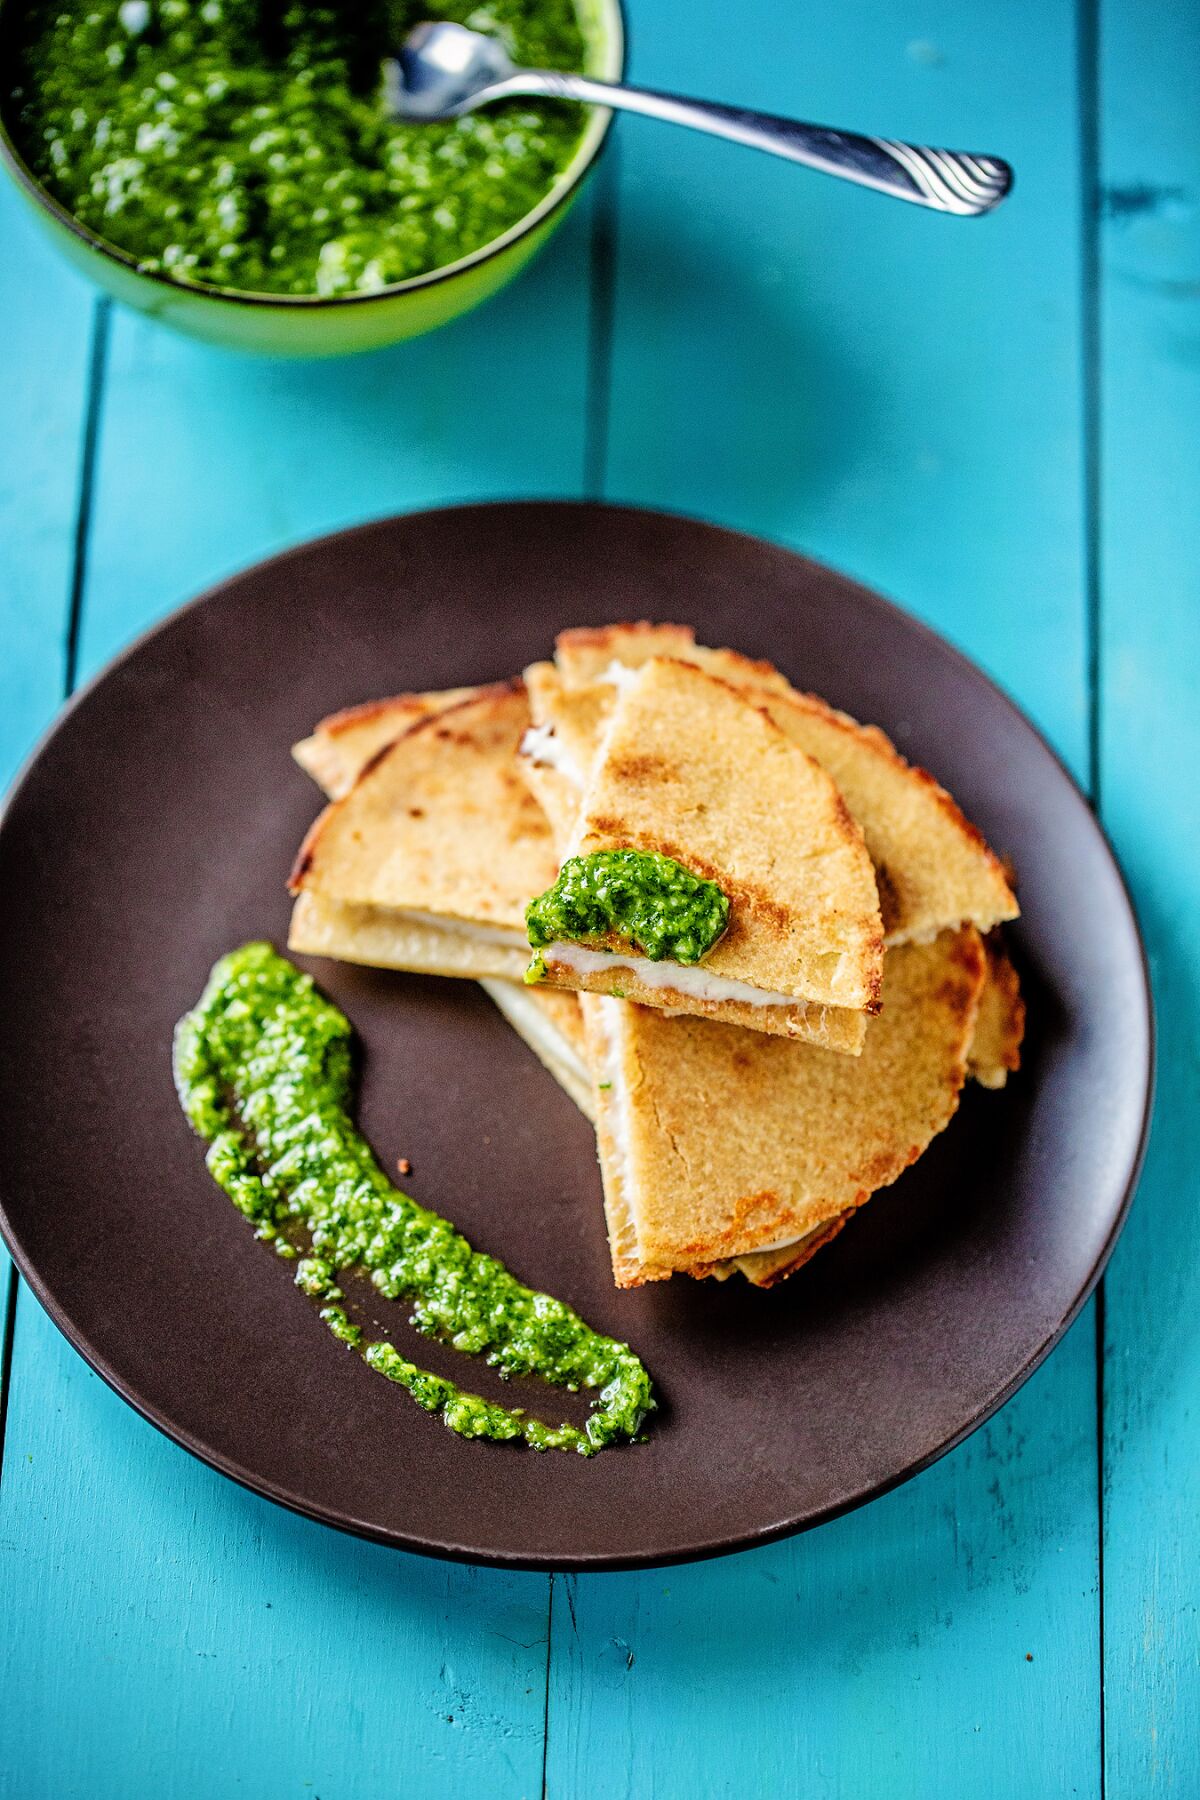 A stack of quesadillas made with cauliflower-corn tortillas sits on a plate.